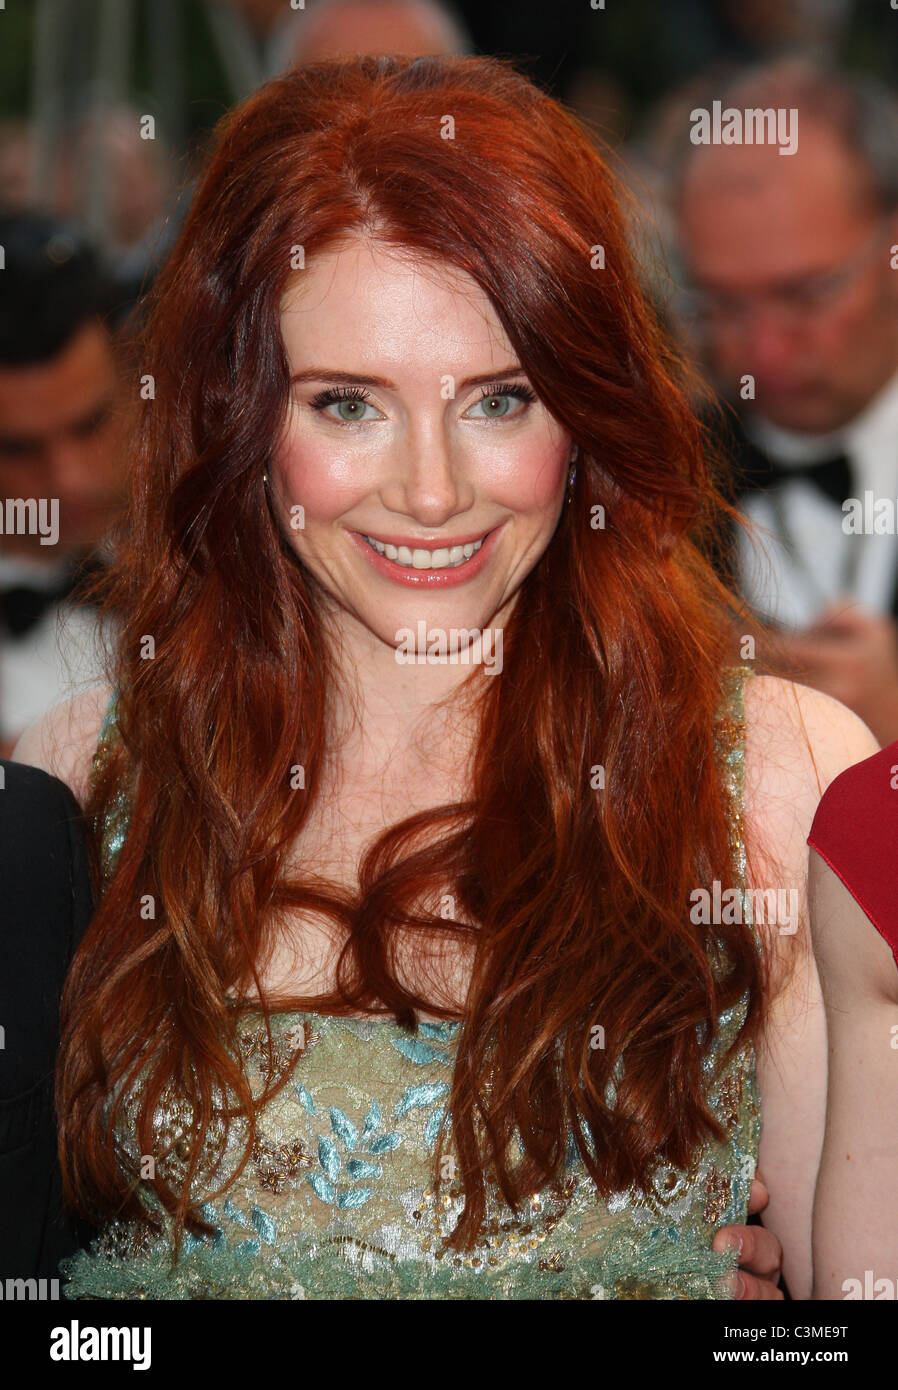 BRYCE DALLAS HOWARD SLEEPING BEAUTY PREMIERE CANNES FILM FESTIVAL 2011  PALAIS DES FESTIVAL CANNES FRANCE 12 May 2011 Stock Photo - Alamy